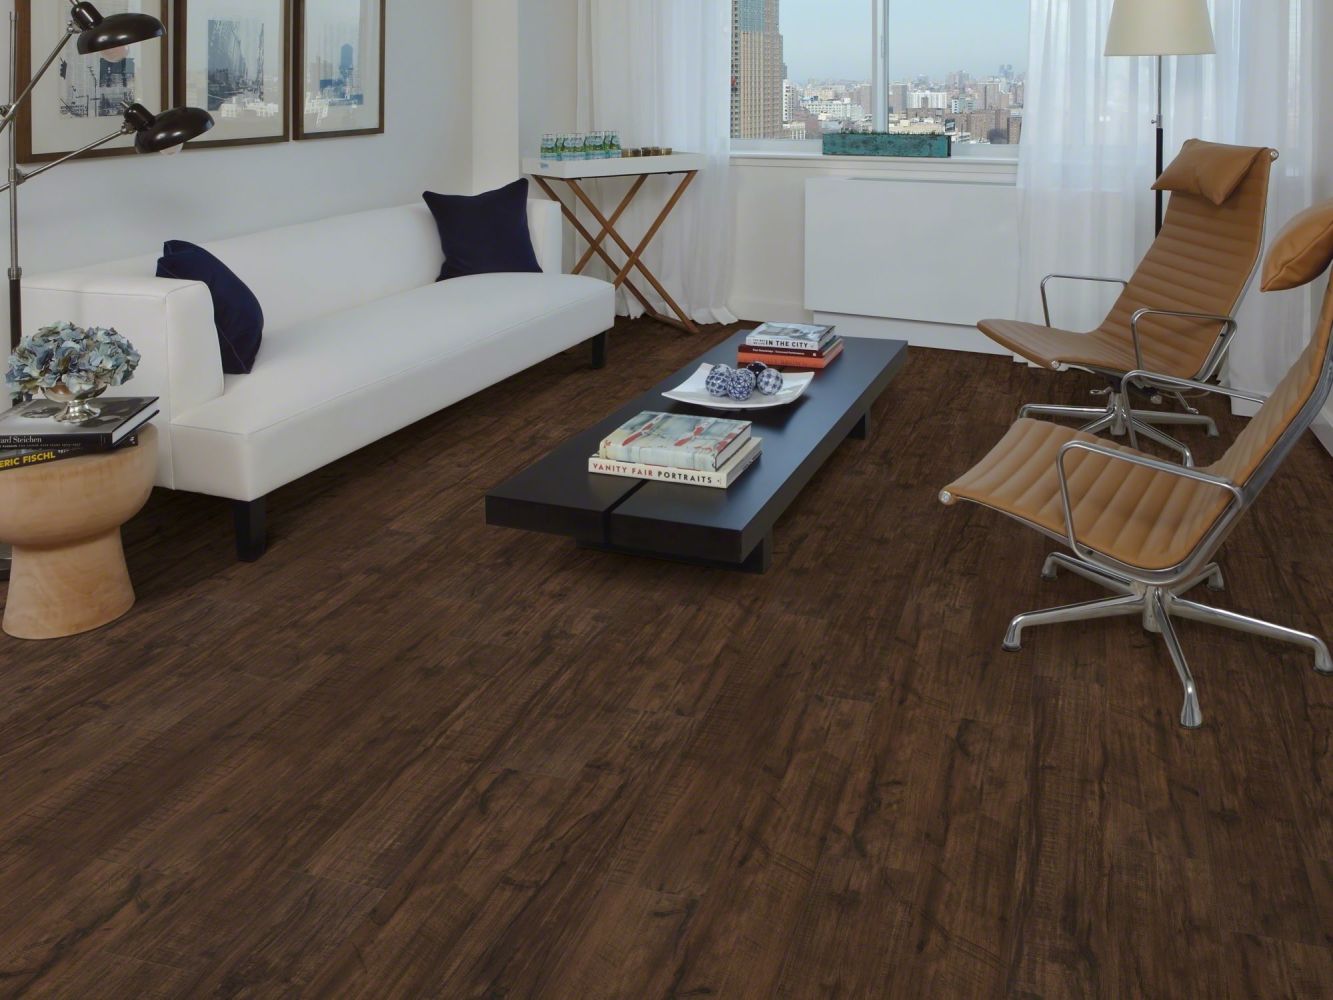 Shaw Floors Resilient Residential Paramount 512c Plus Umber Oak 00734_509SA